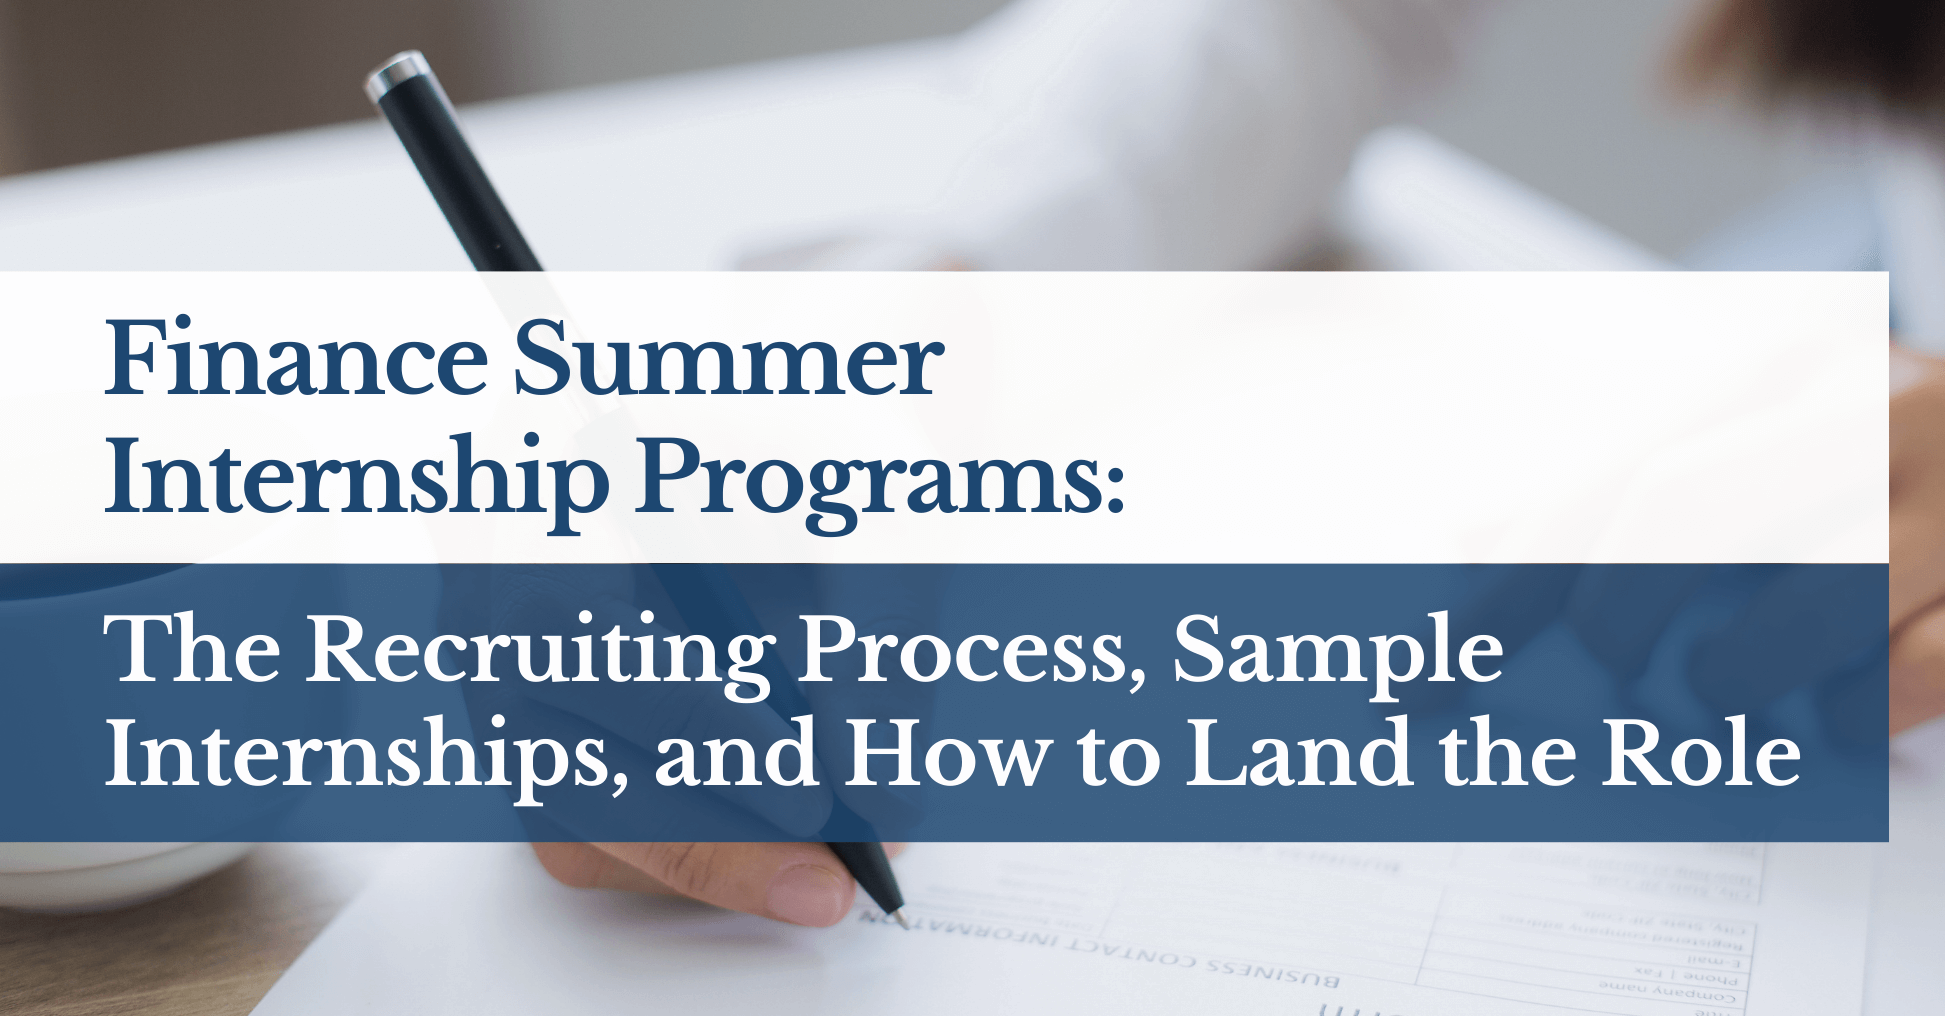 Finance Summer Internship Programs: The Recruiting Process, Sample Internships, and How to Land the Role